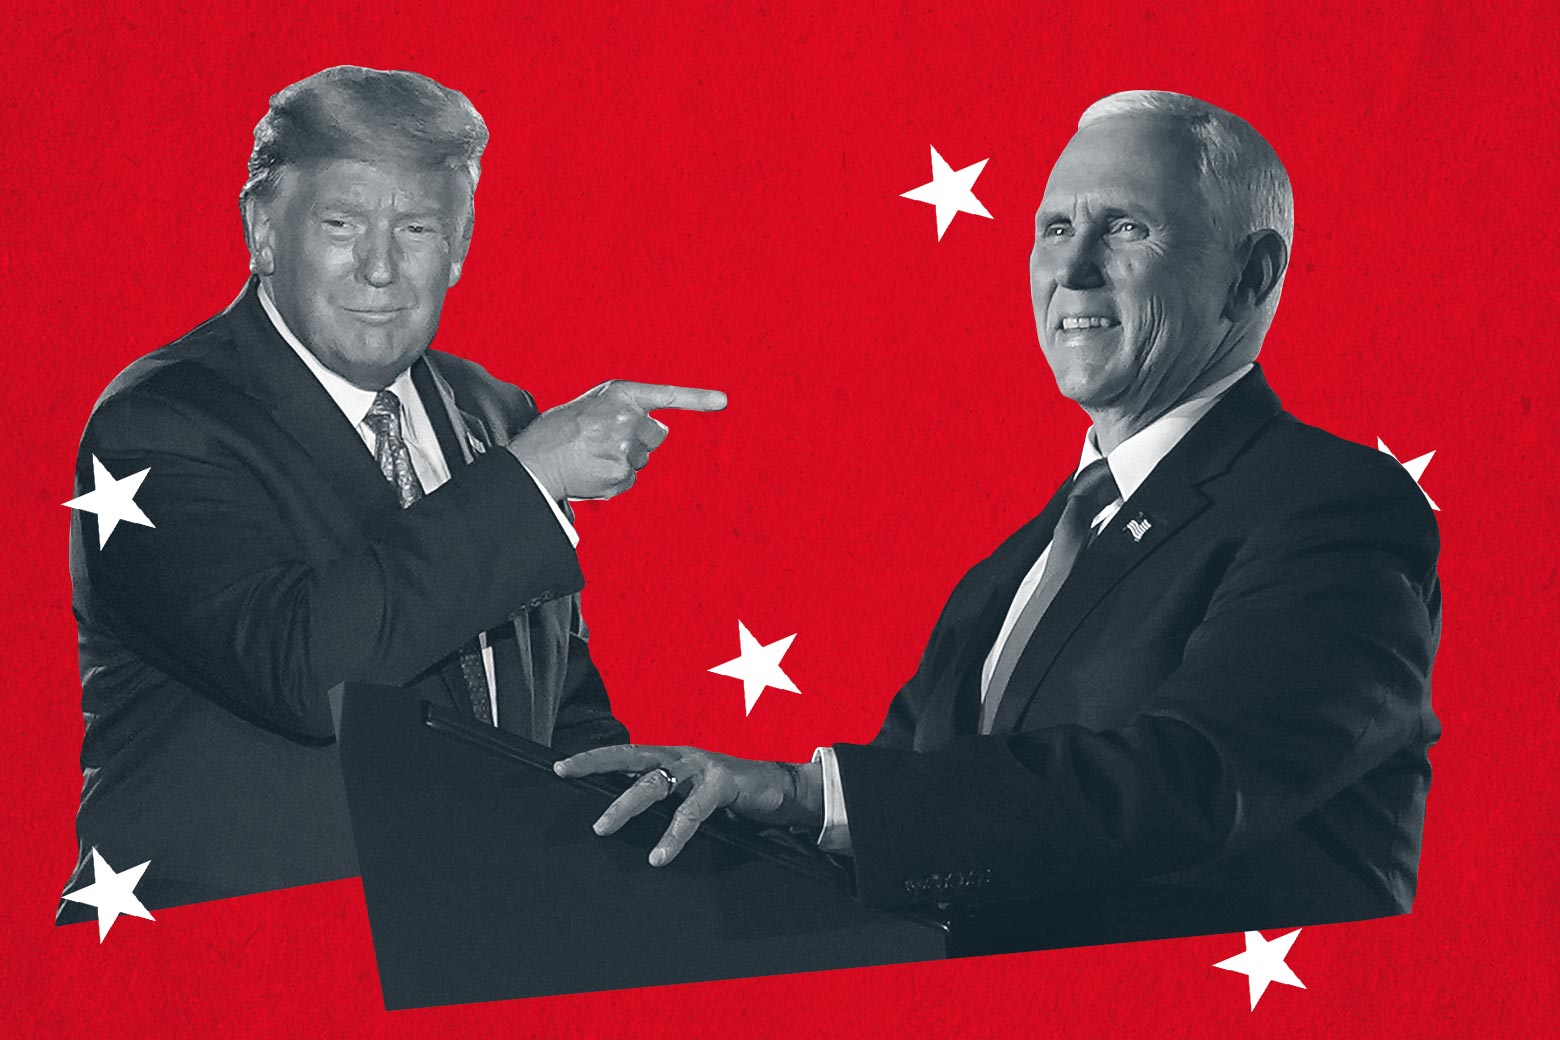 Donald Trump pointing at Mike Pence, seen against a red background and surrounded by white stars